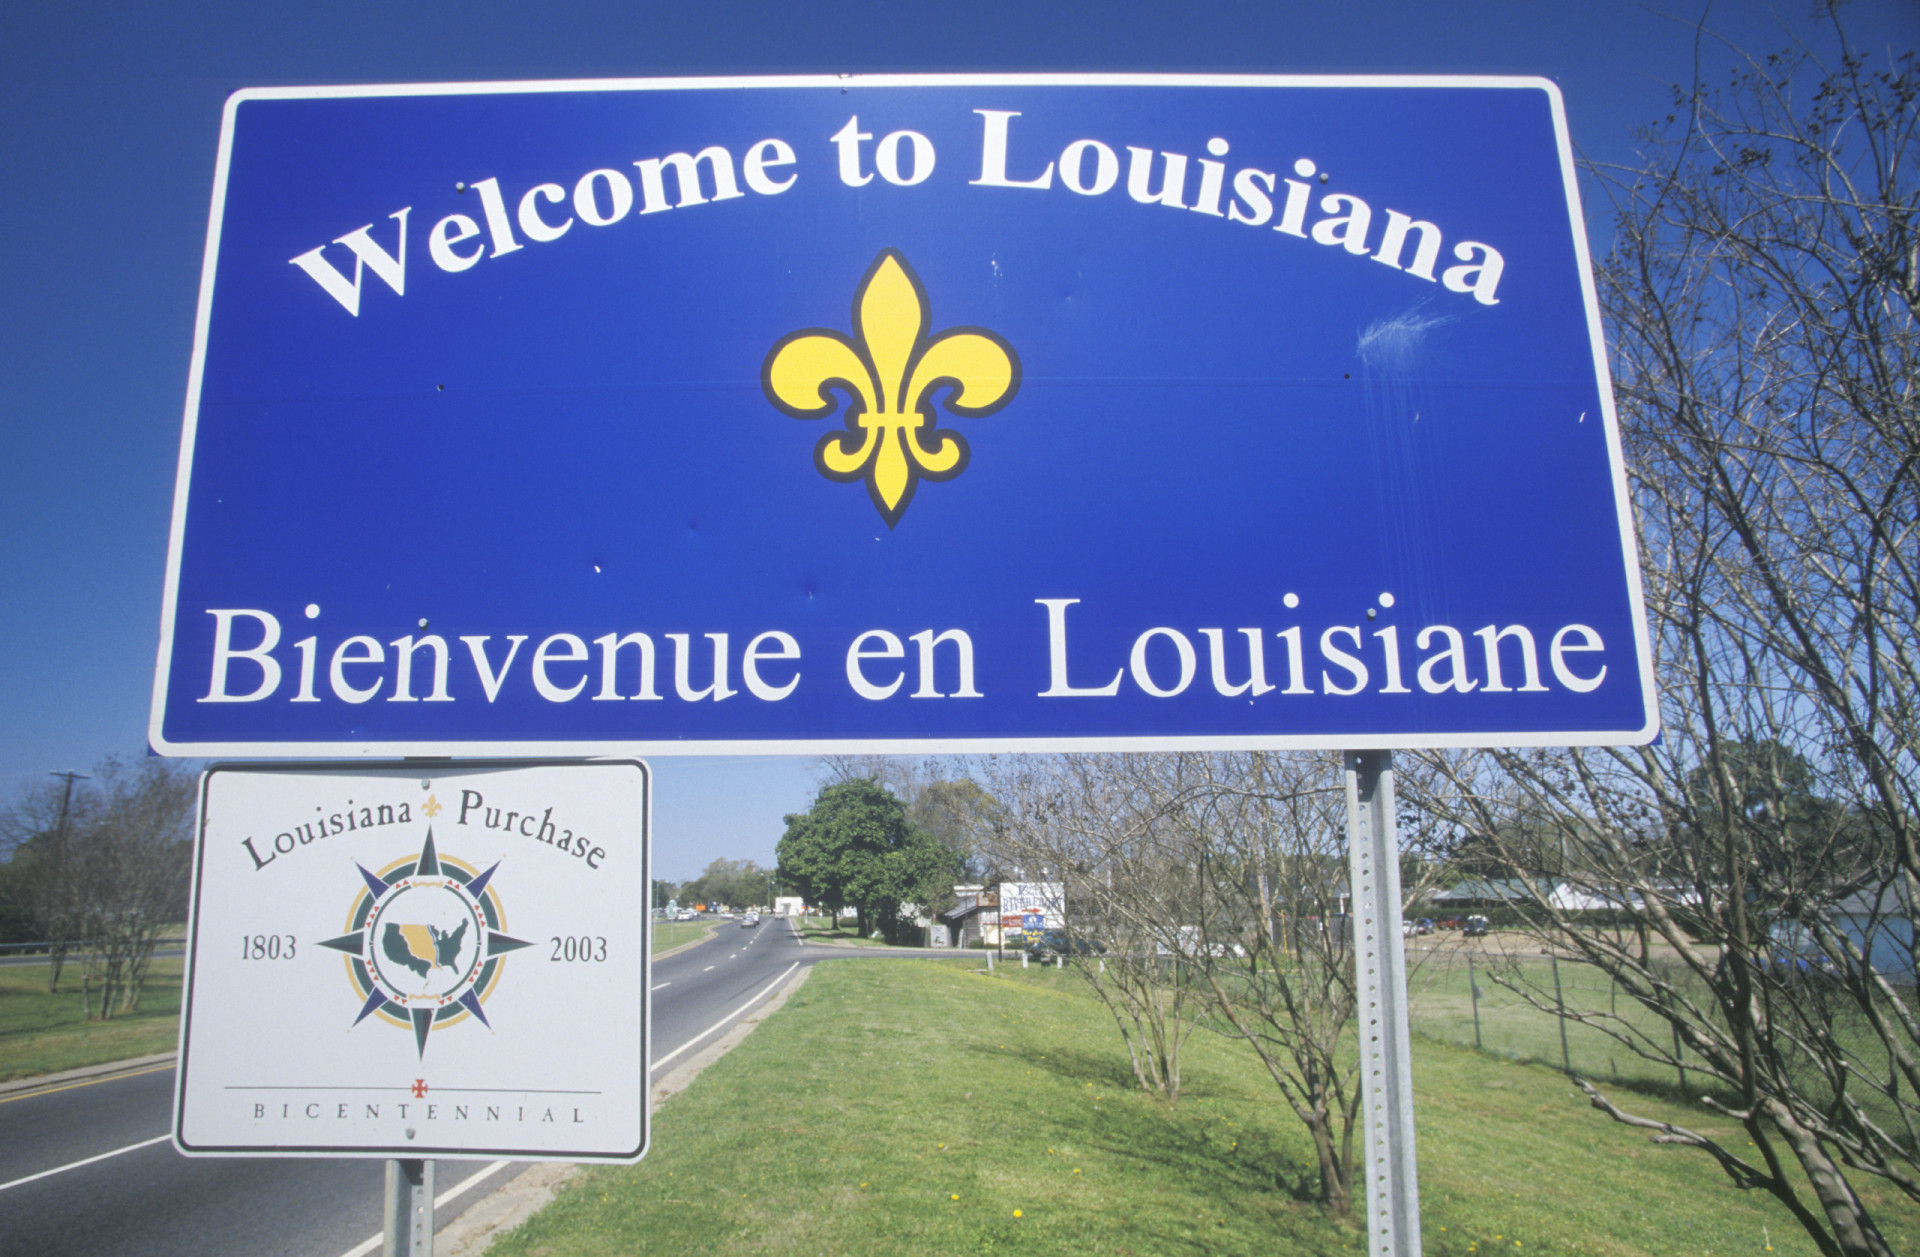 <p>The state welcome sign can be read in both English and French, due to Louisiana's bilingual heritage. </p><p>You may also like:<a href="https://www.starsinsider.com/n/359973?utm_source=msn.com&utm_medium=display&utm_campaign=referral_description&utm_content=572689en-en"> The world's most beautiful flower fields to visit</a></p>